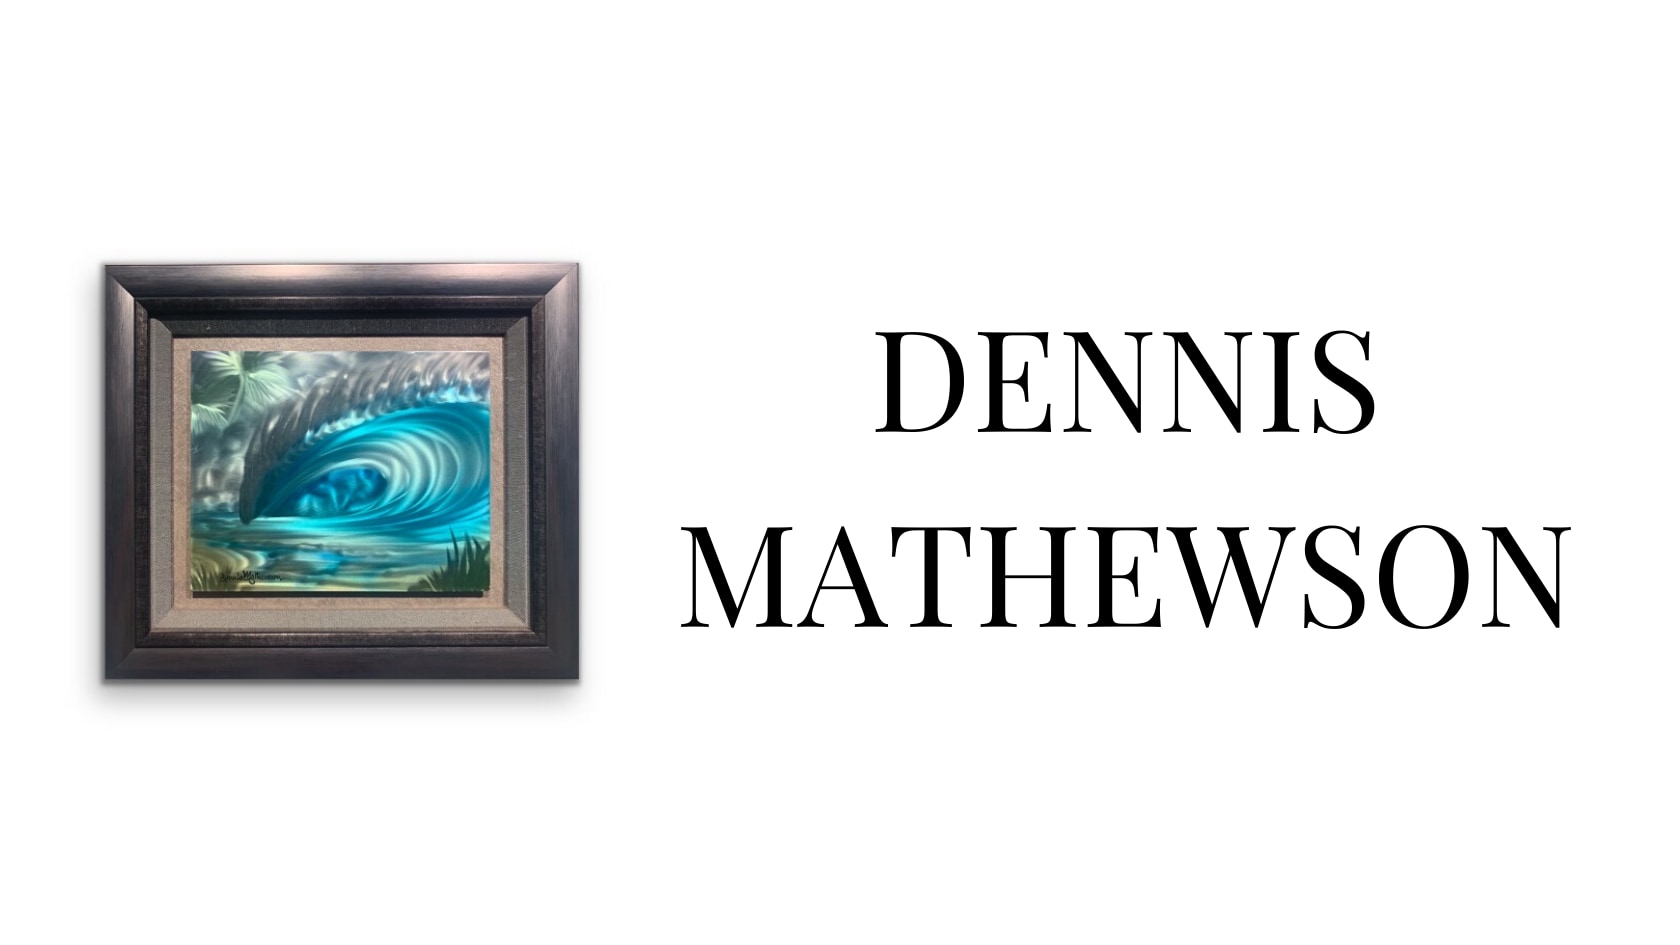 
        <div class='title'>
          Evo Art Maui Artist Front Street Lahaina Gallery Classical Surreal Contemporary Abstract Bears Dolphins Whales Sculpture Metaphorical Vladimir Kush Lassen Provenza Parkes Bond Banovich Landscape Hawaii13
        </div>
       